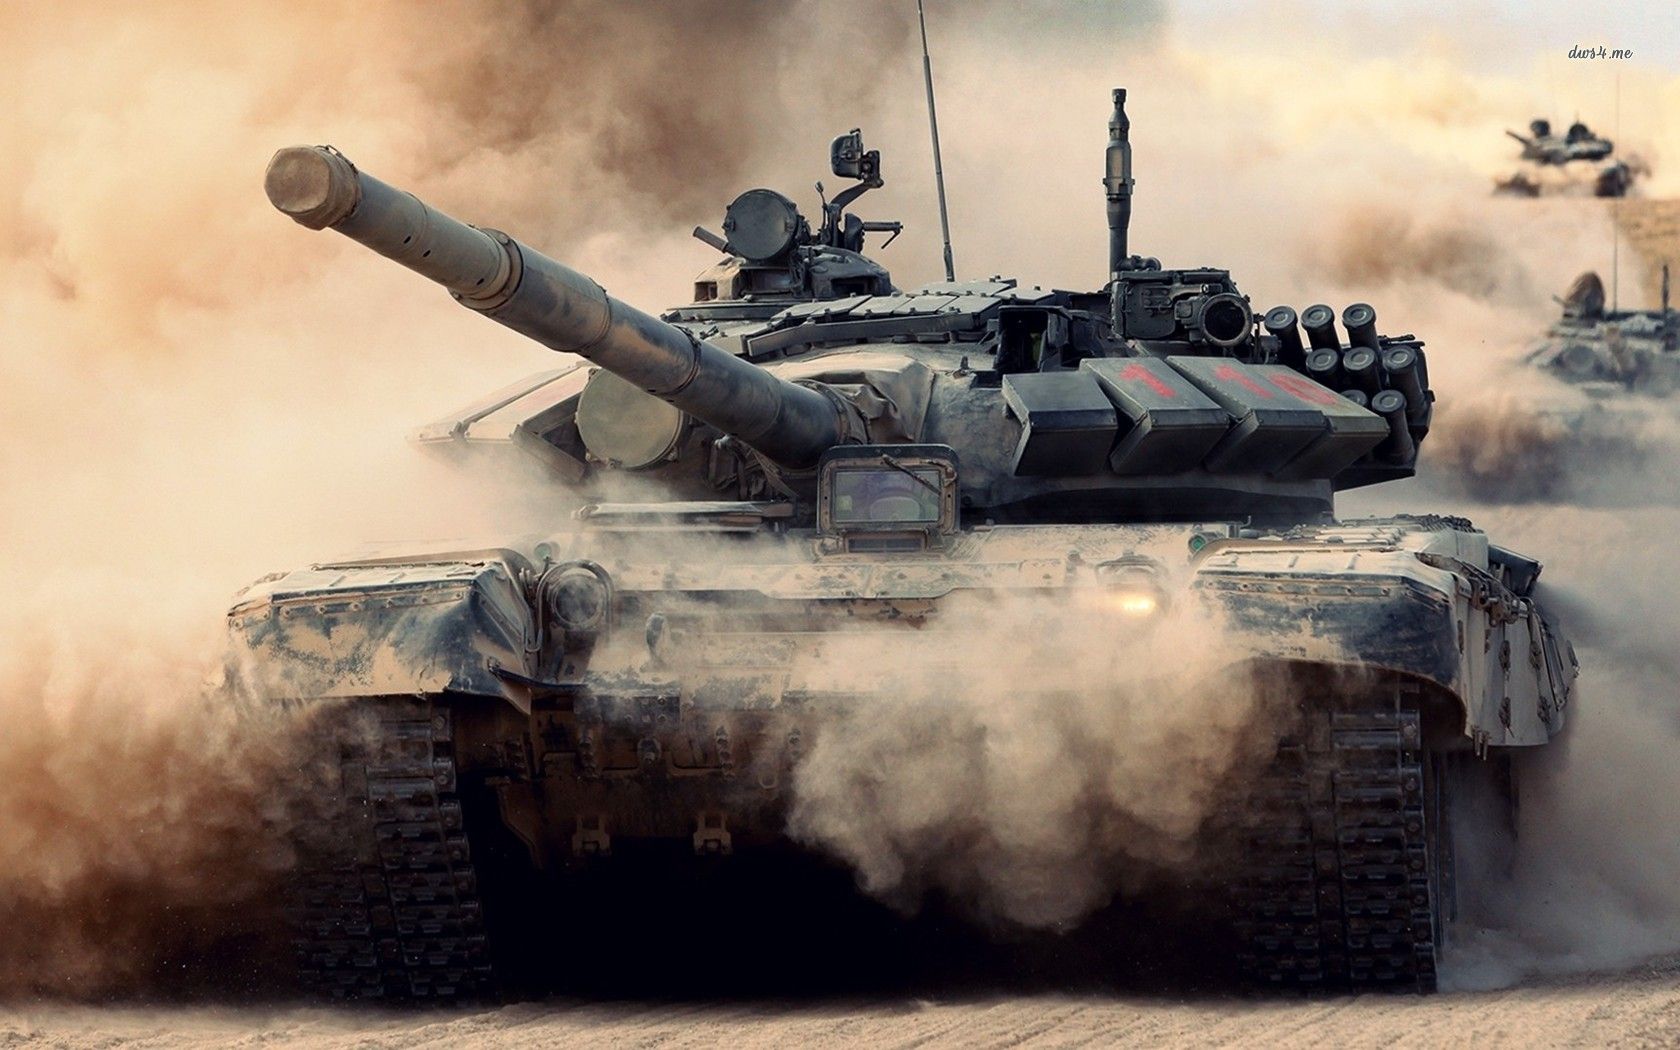 T-90 tank wallpaper - Photography wallpapers - #24270